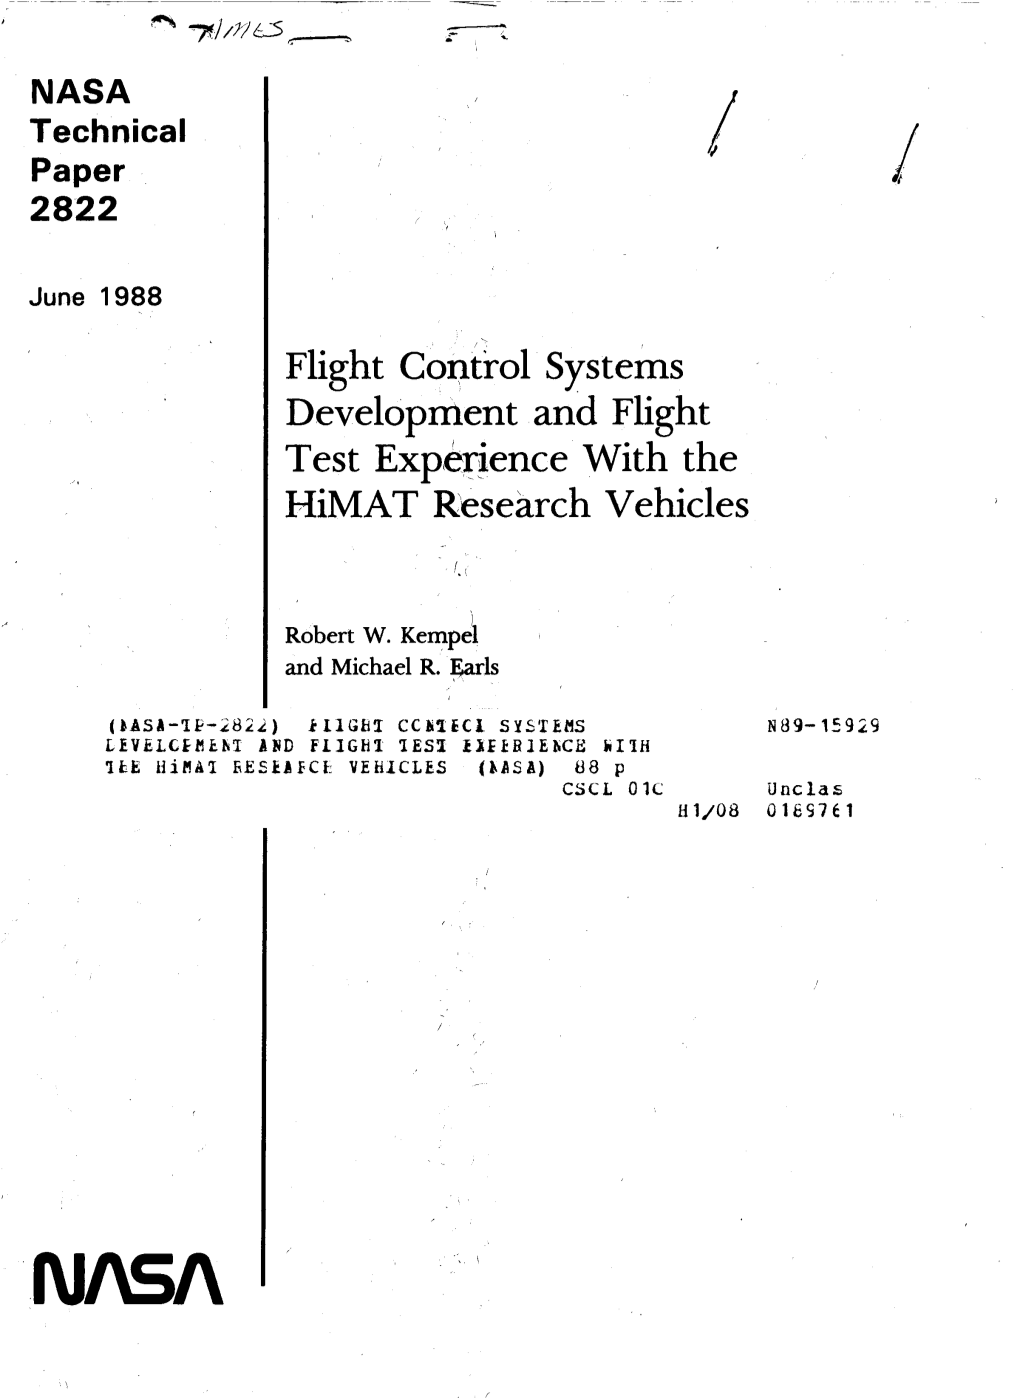 Flight Control Systems Development and Flight Test Exp(6Rience With